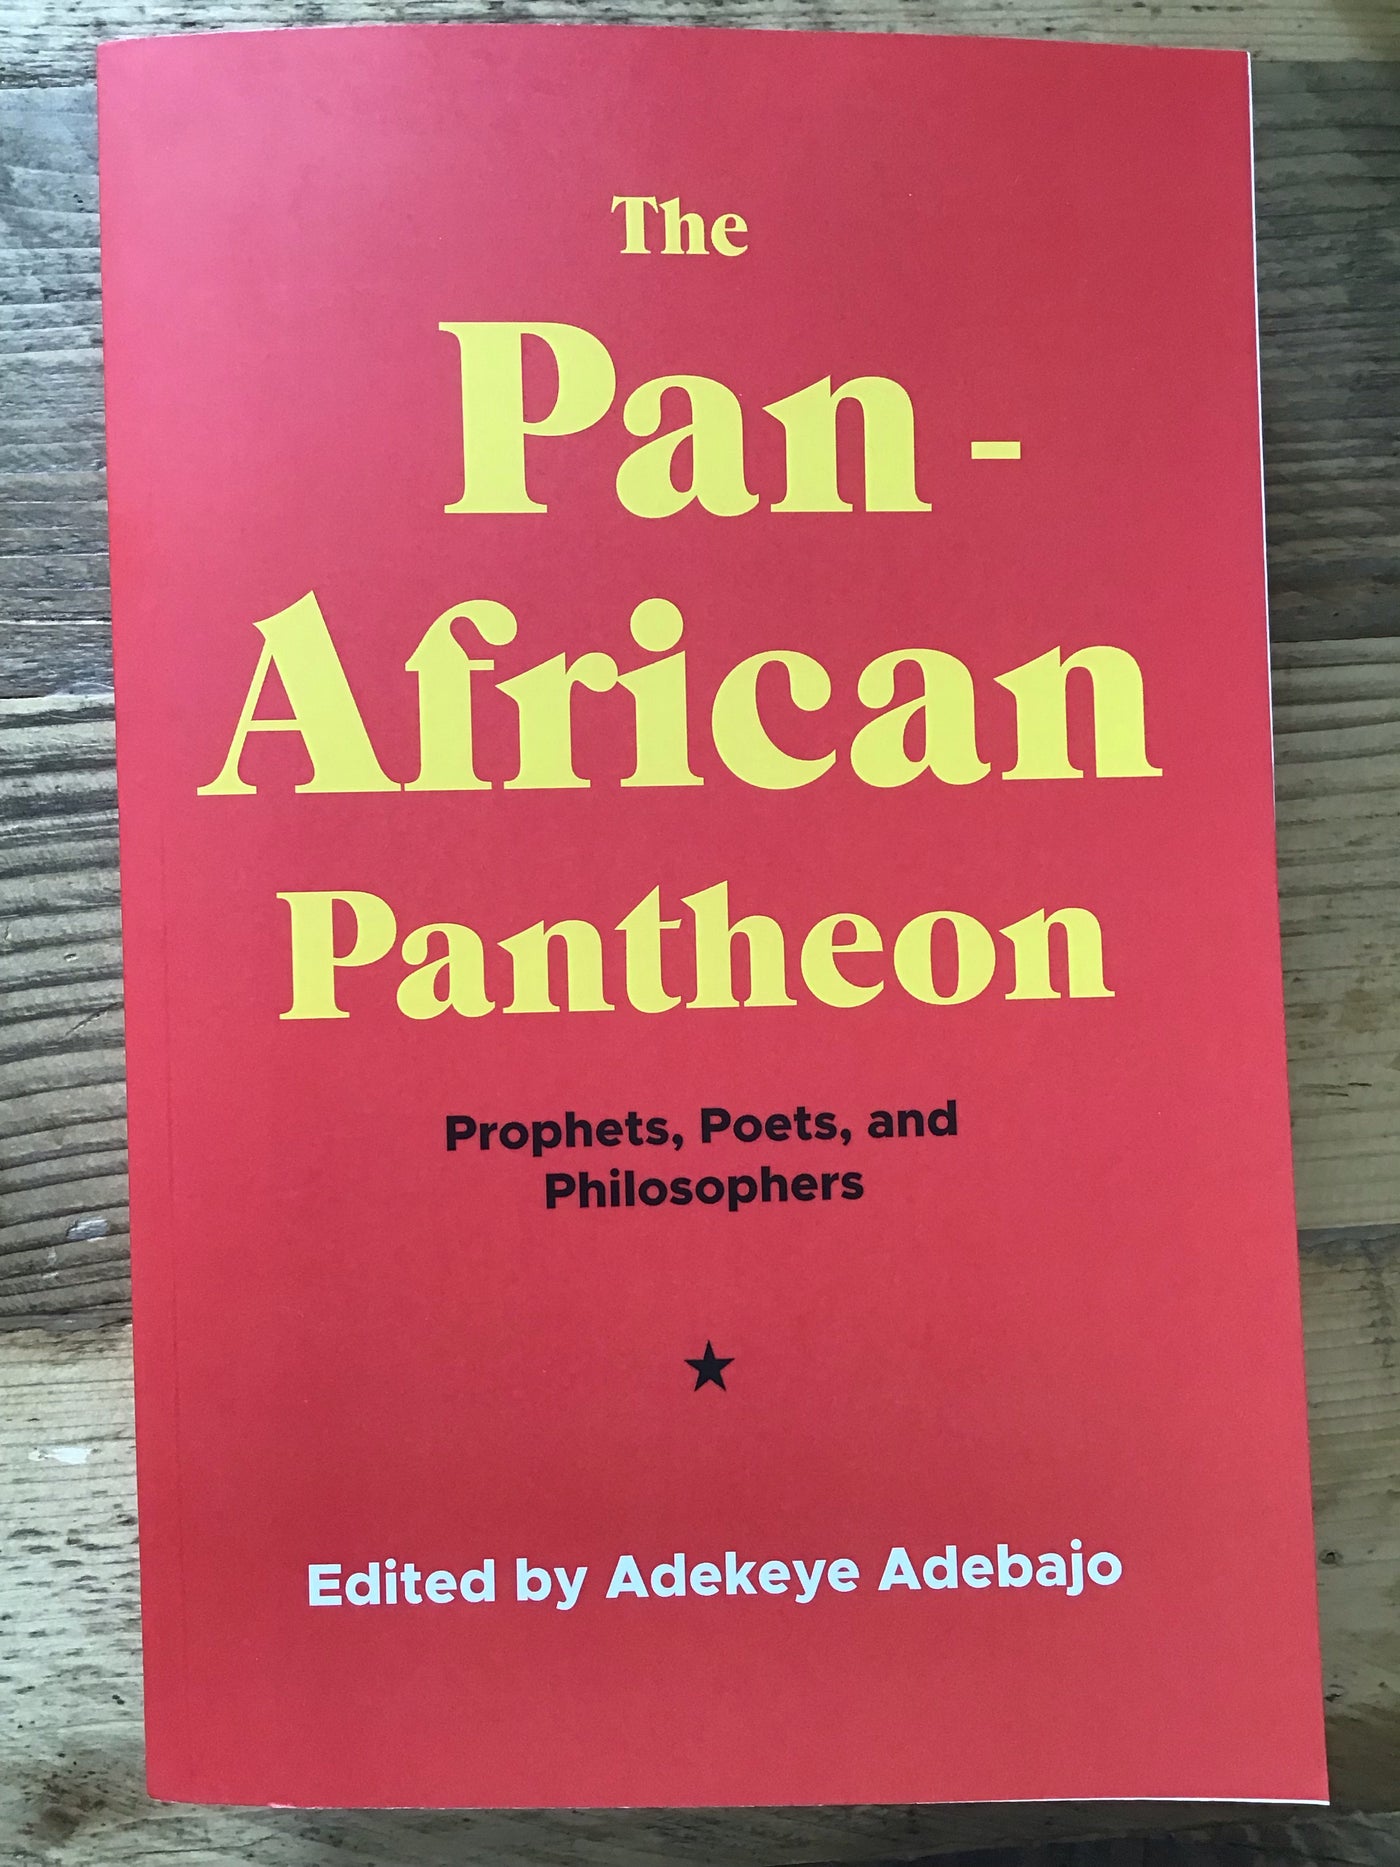 The Pan-African Pantheon : Prophets, Poets, and Philosophers